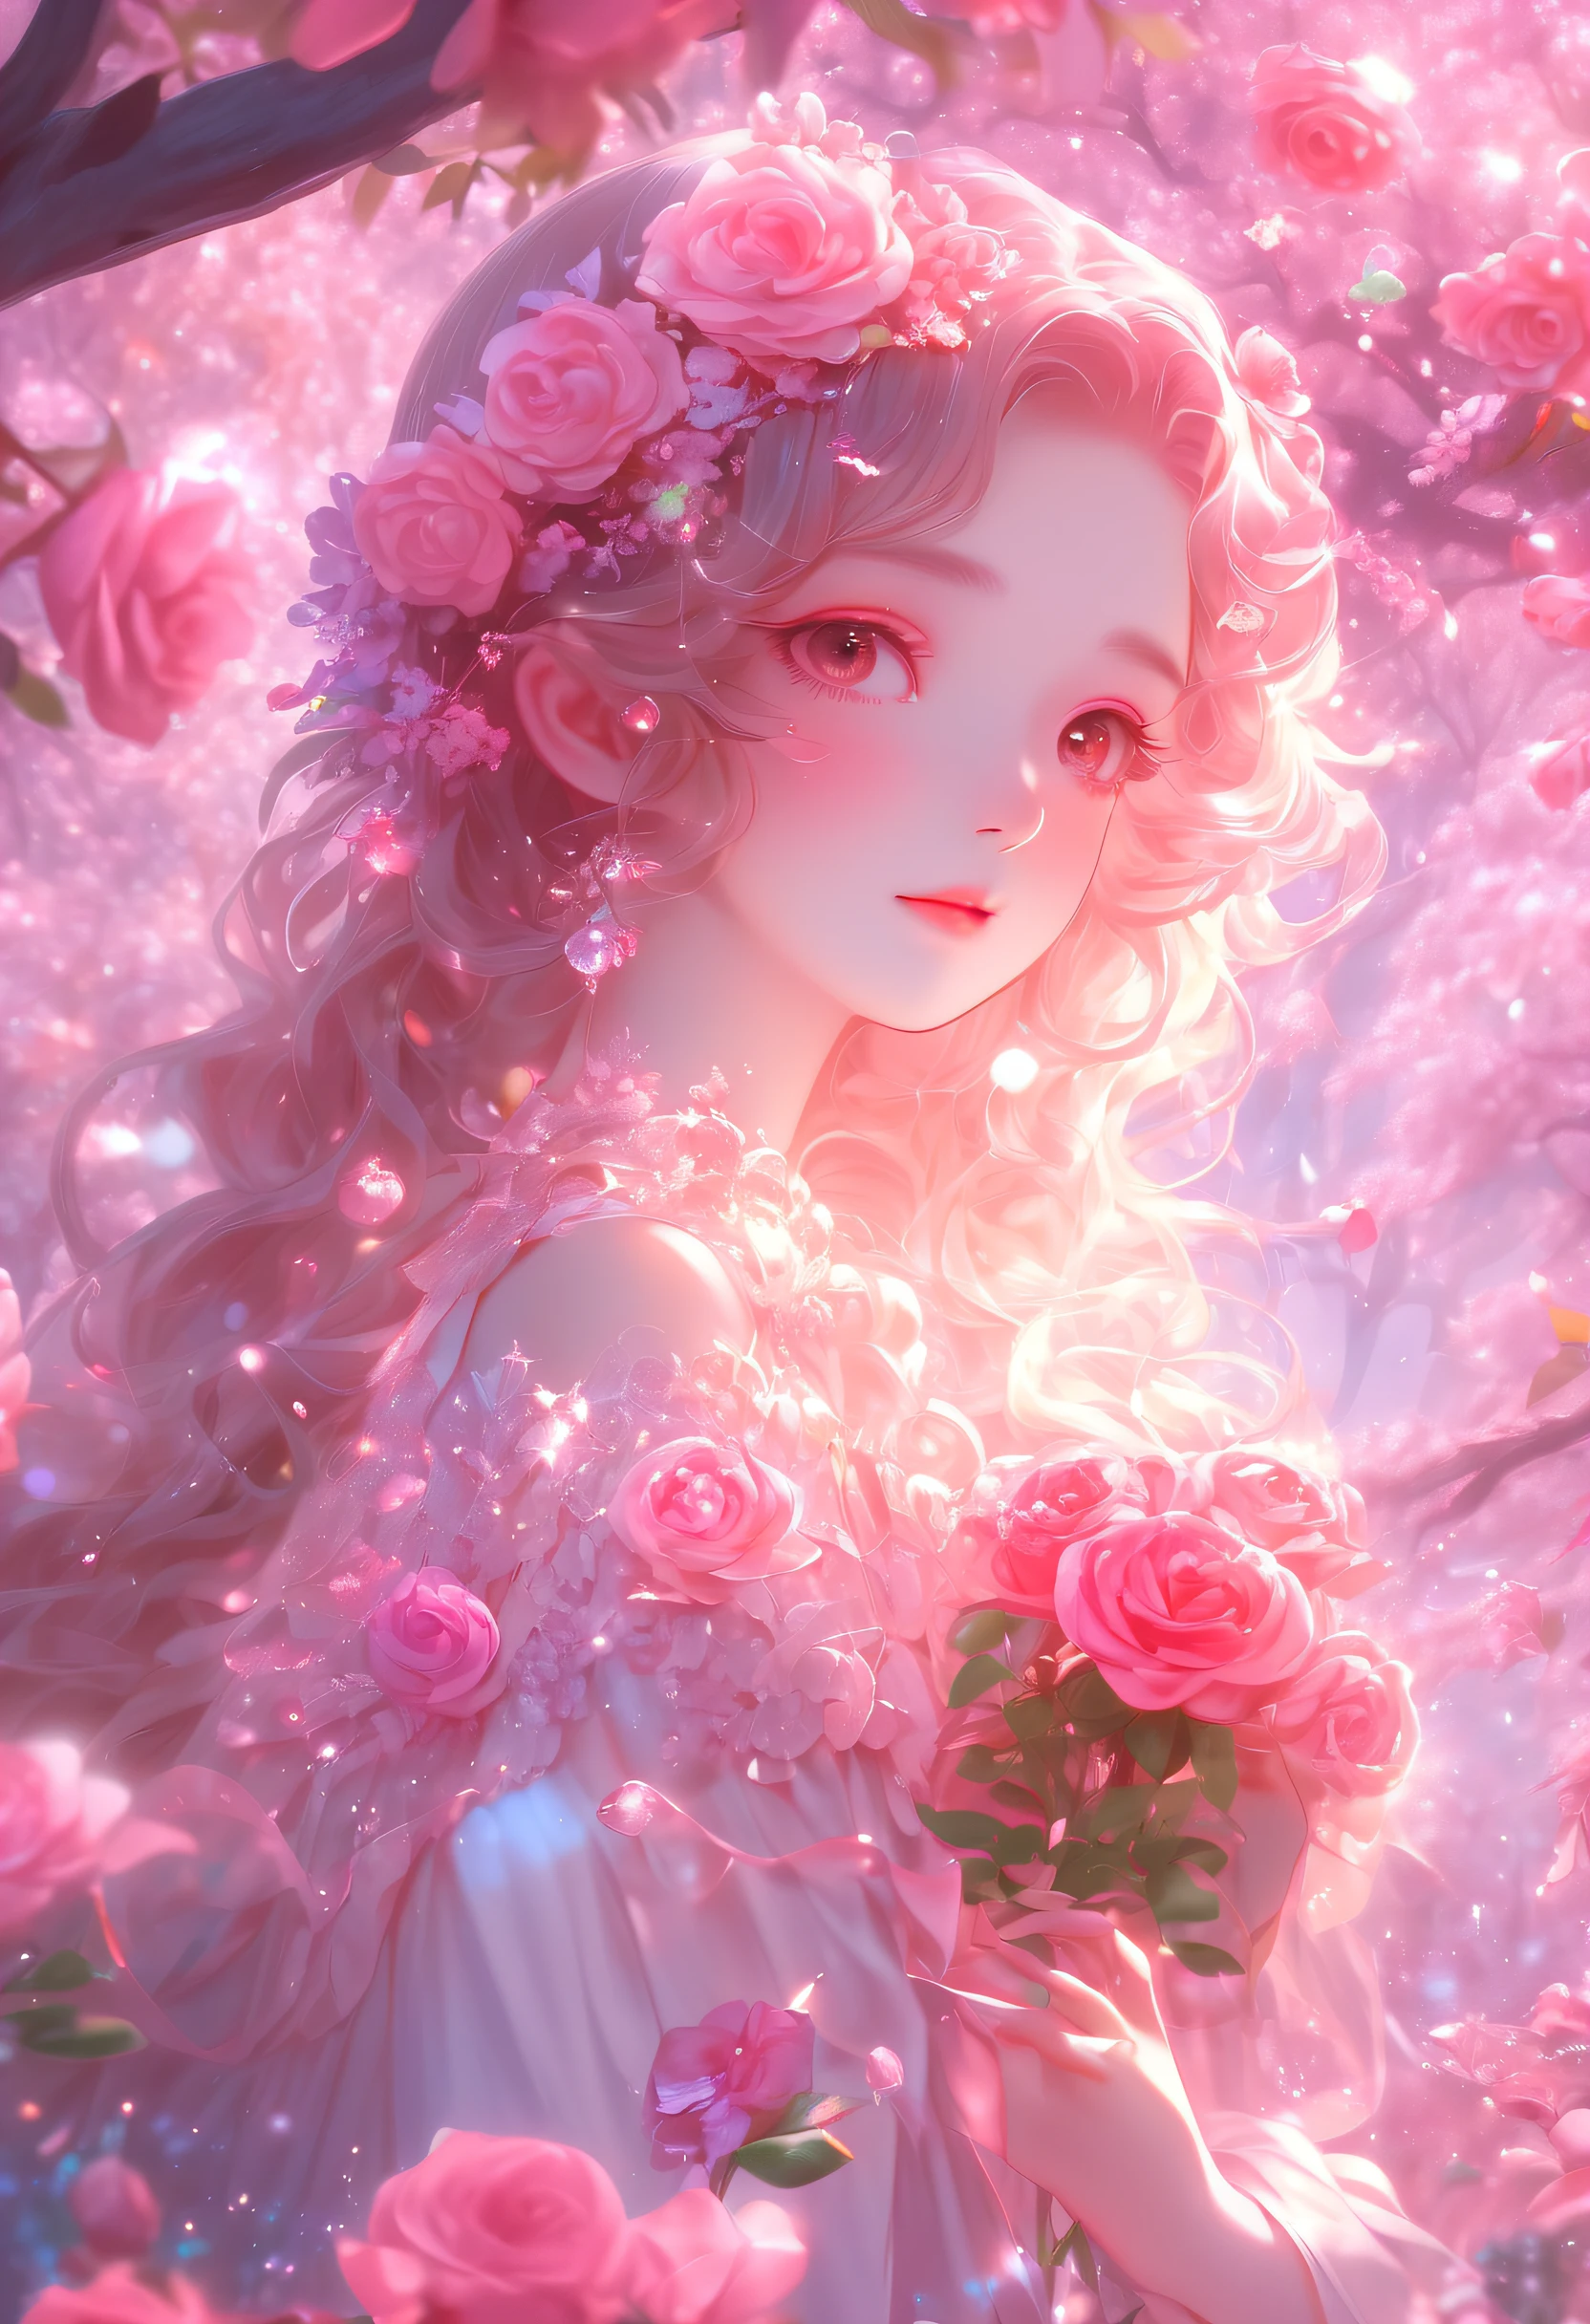 wallpaper hd, Flower art, Rose, Blooms in spring, Photo, kawaii, Cute anime, Girl, Light magenta and light crimson style, angura kei, sparkling water reflections, Rococo portrait, ethereal trees, Univalent, les nabis,serenidade,Dreamy,16k